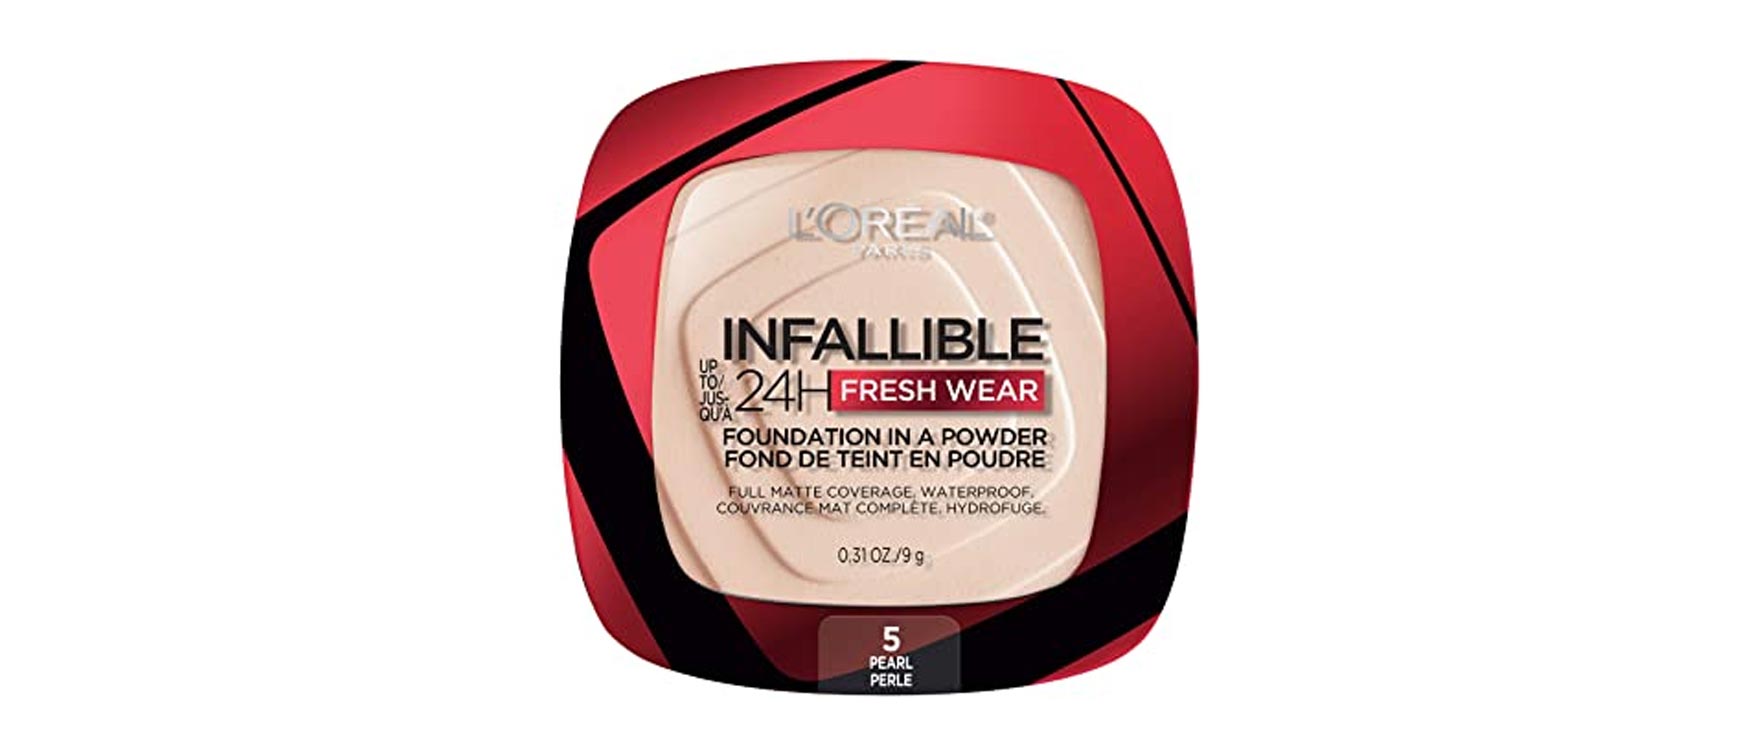 4. L'Oreal Paris Infallible Up To 24H Fresh Wear Foundation In A Powder